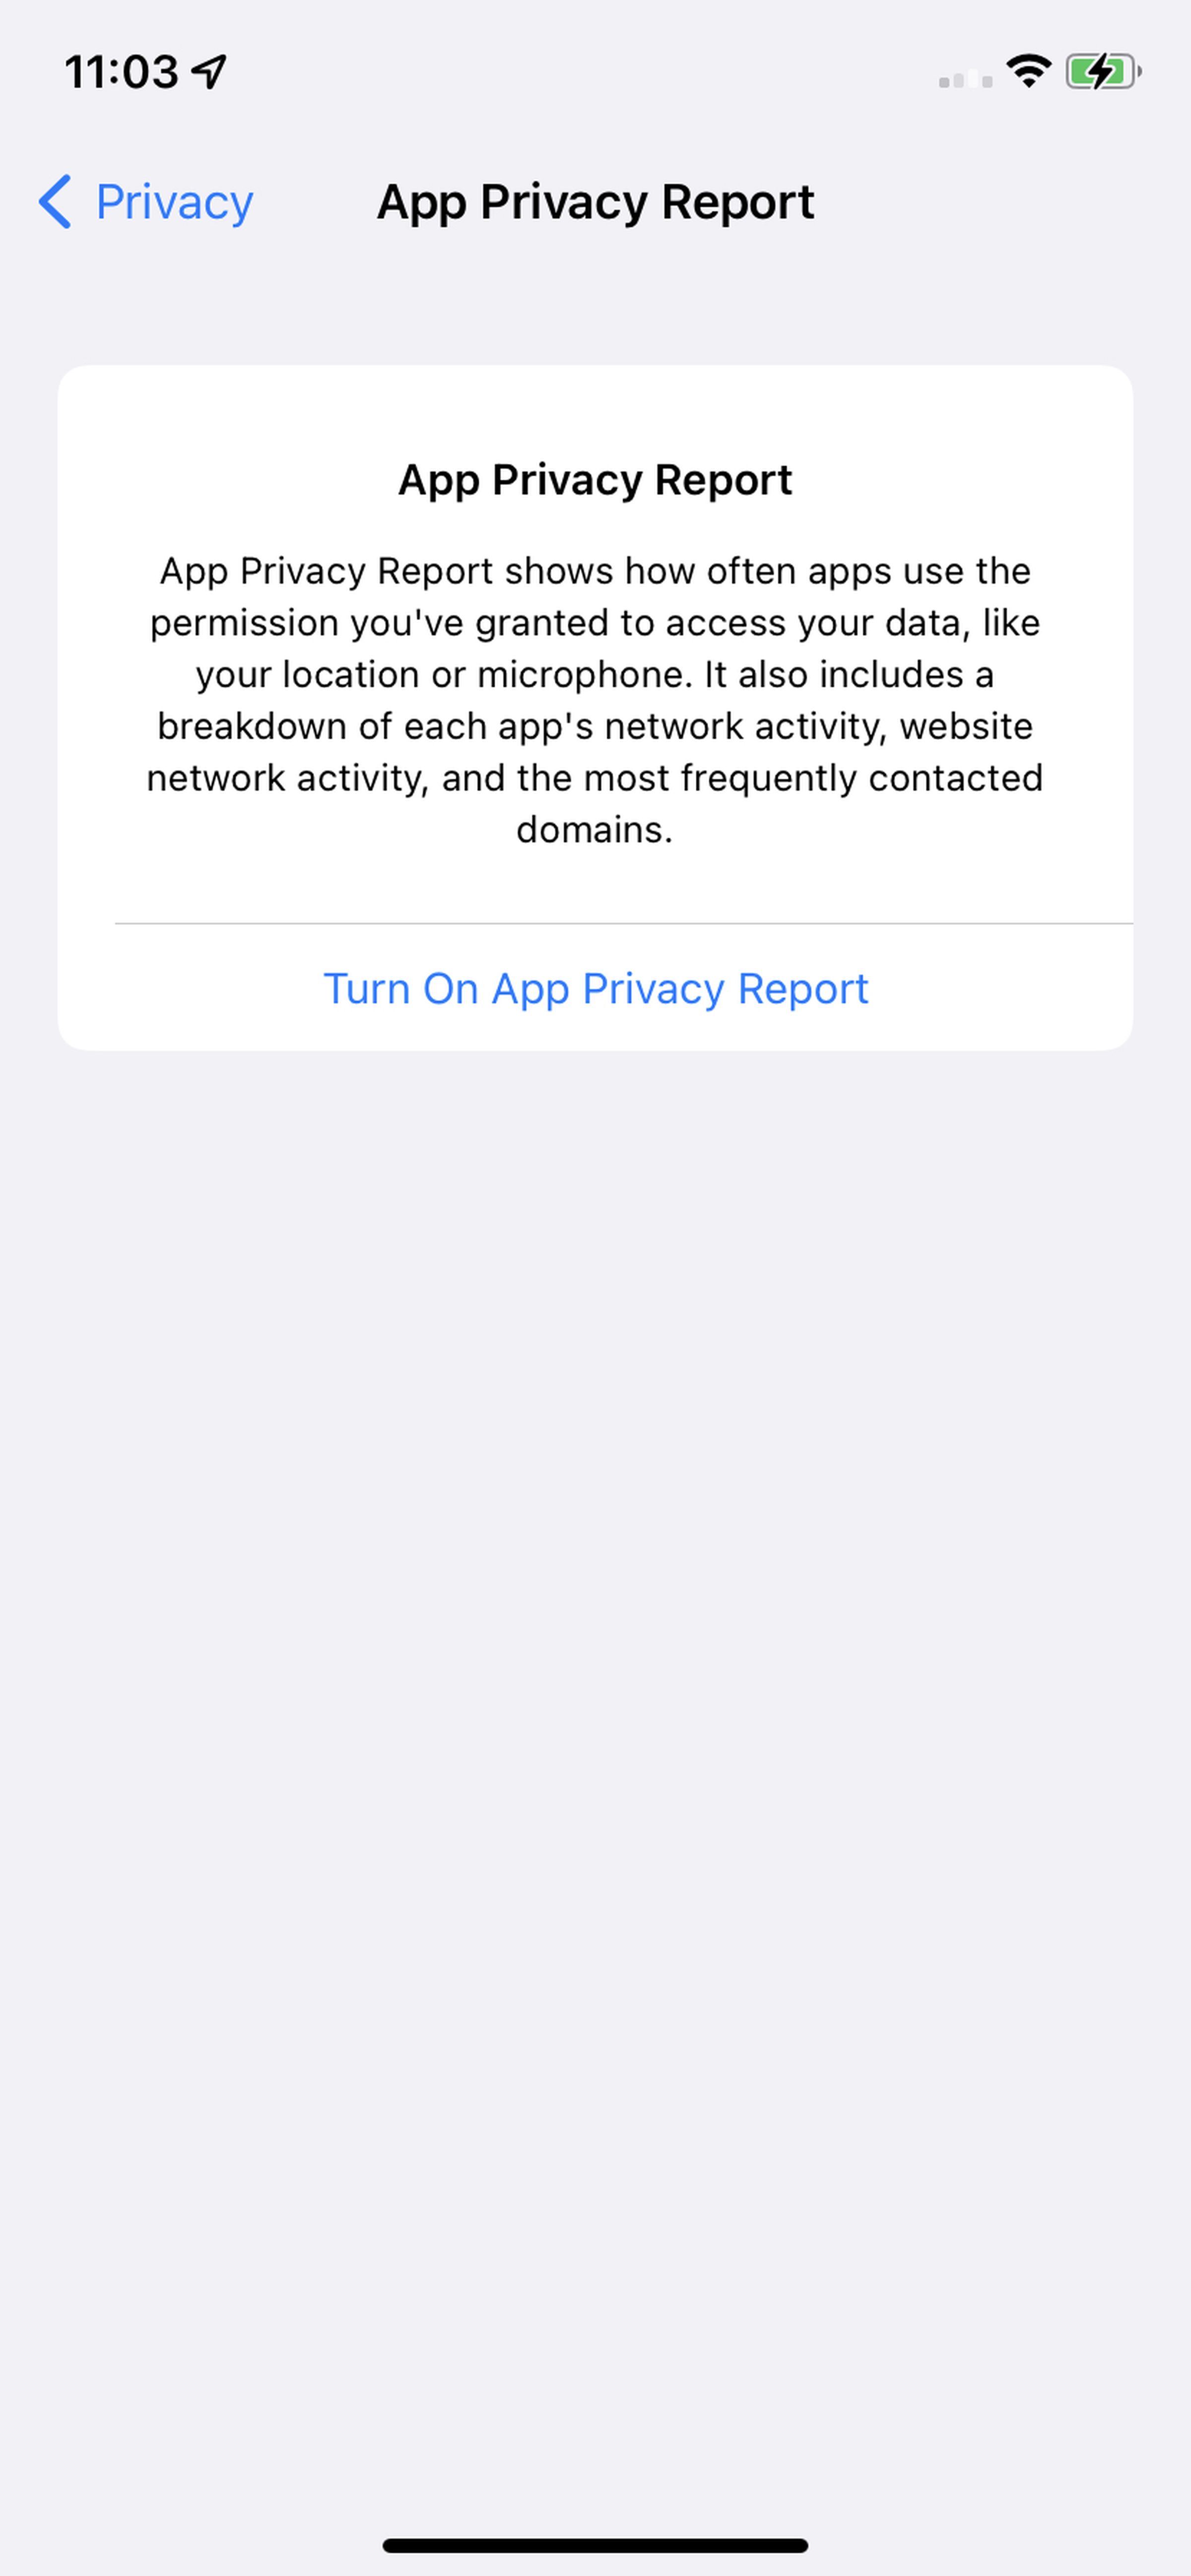 Just turn on the App Privacy Report — and wait.